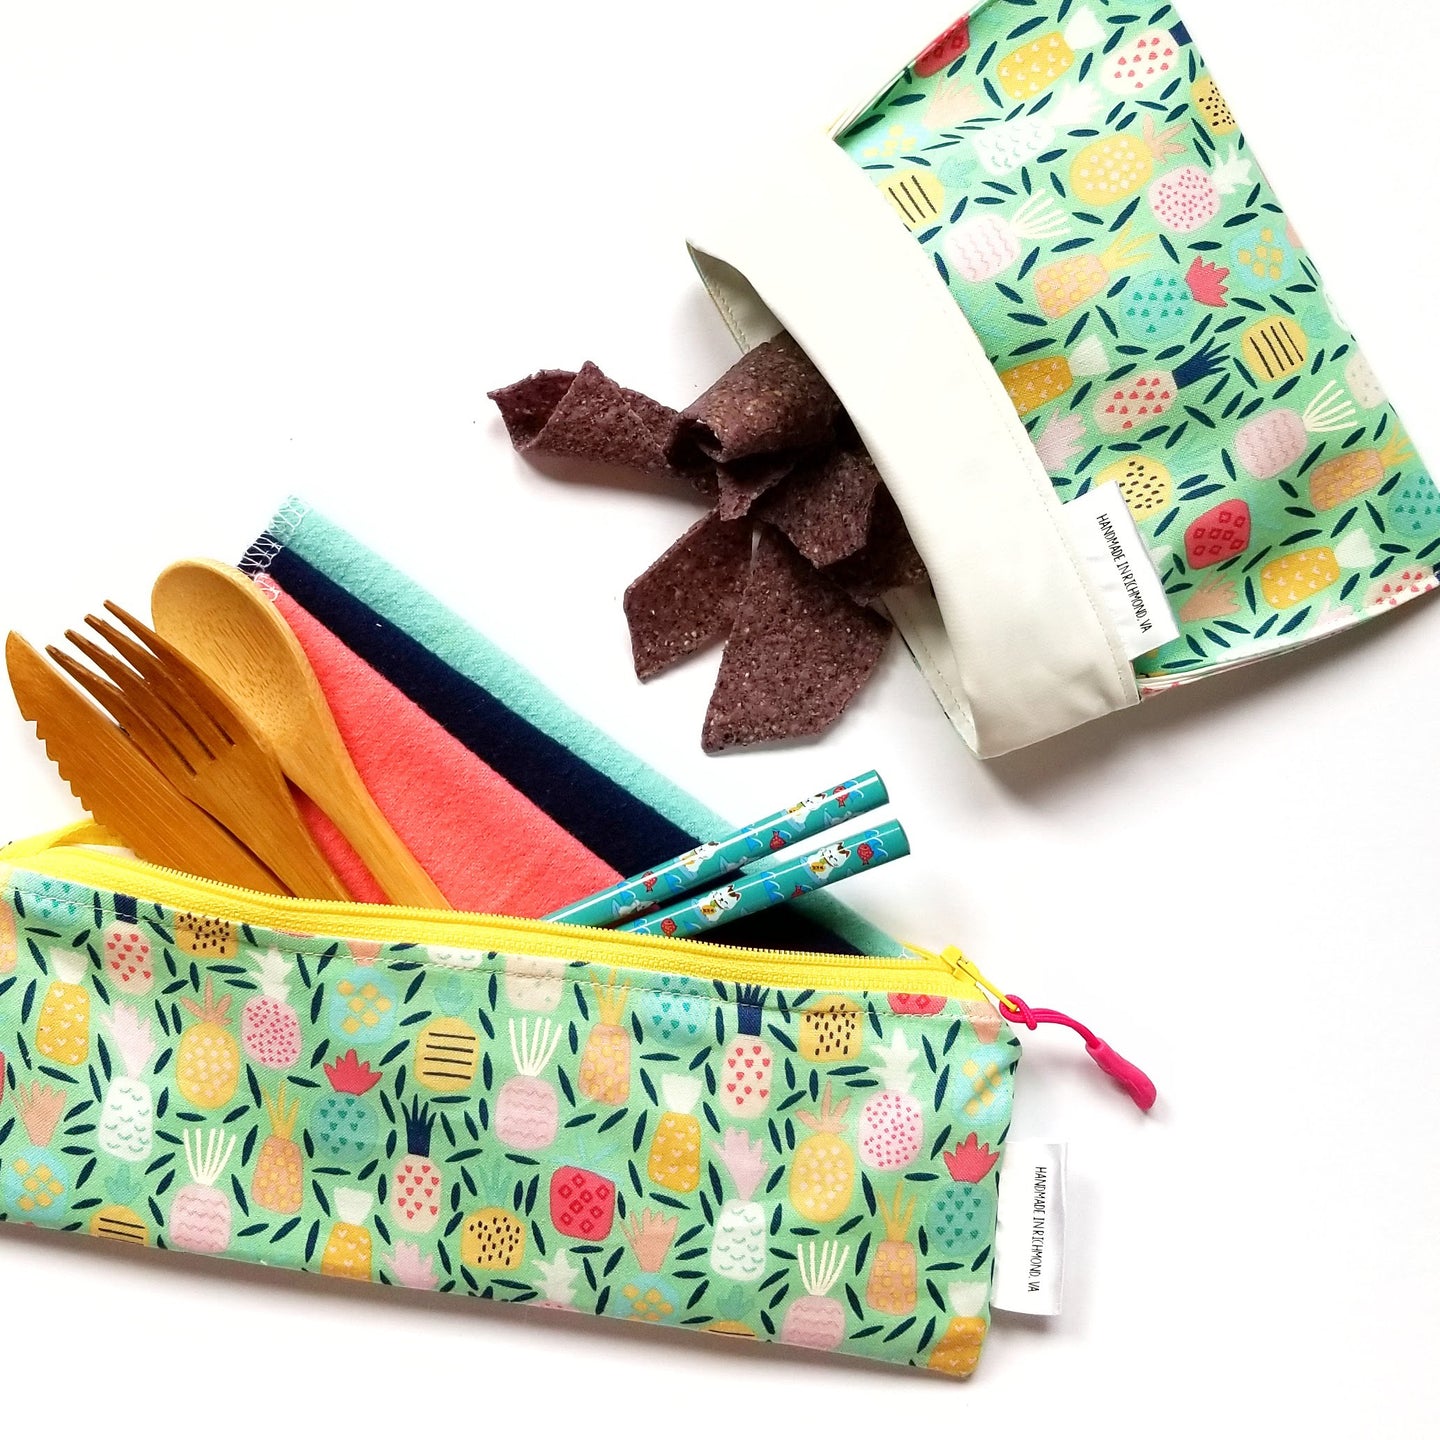 Cutlery pouch with cloth napkins, bamboo cutlery, and chopsticks, as well as a reusable snack bag with chips in it. 